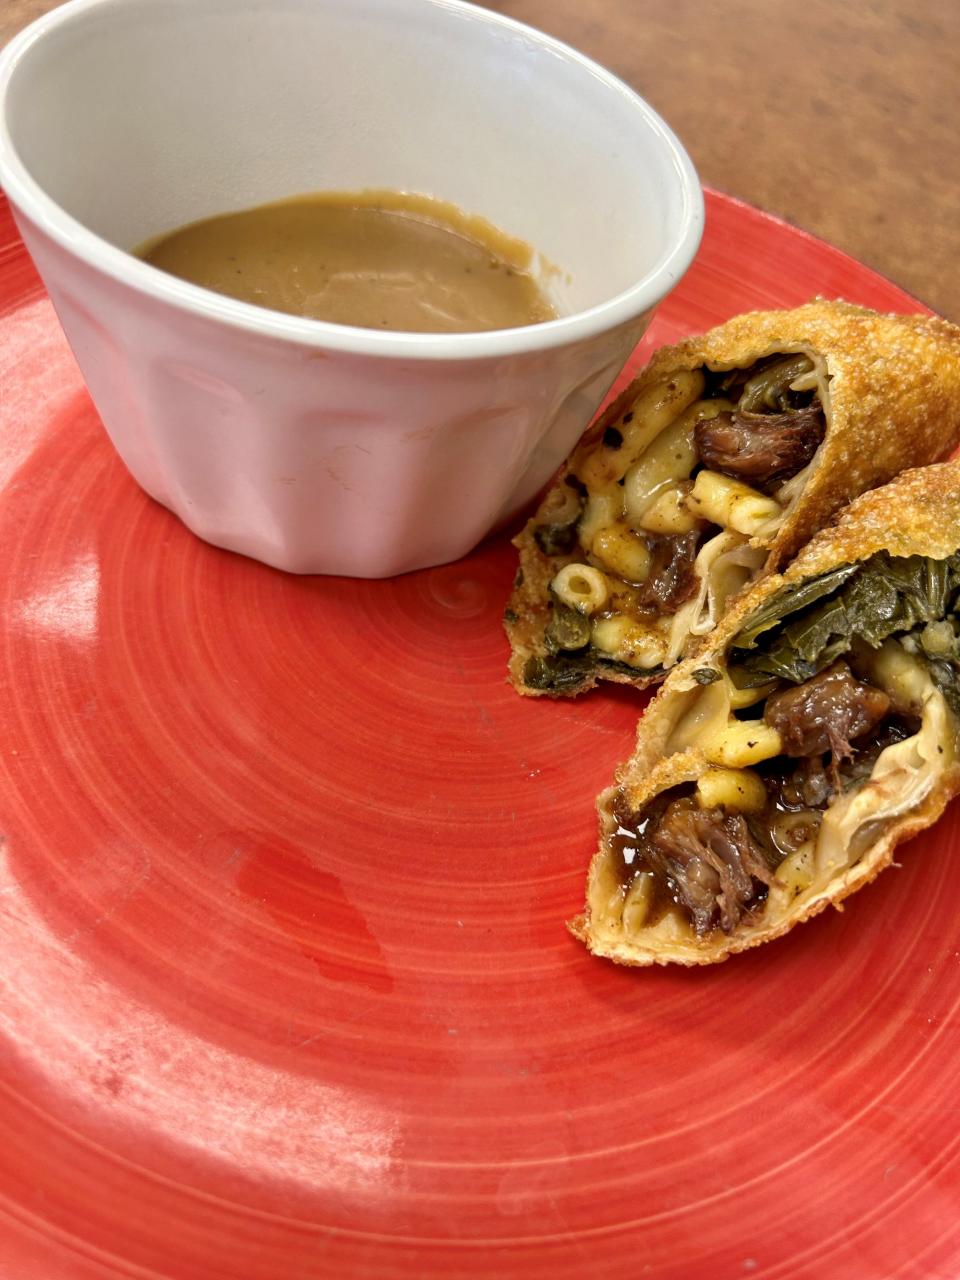 While much of the menu at Chef's Kitchen in Cocoa is traditional soul food, chef Mike Blackwell likes to get creative sometimes. This is the Soul Roll, oxtail, mac and cheese and collard greens stuffed into an eggroll wrapper, fried and served with a side of gravy.